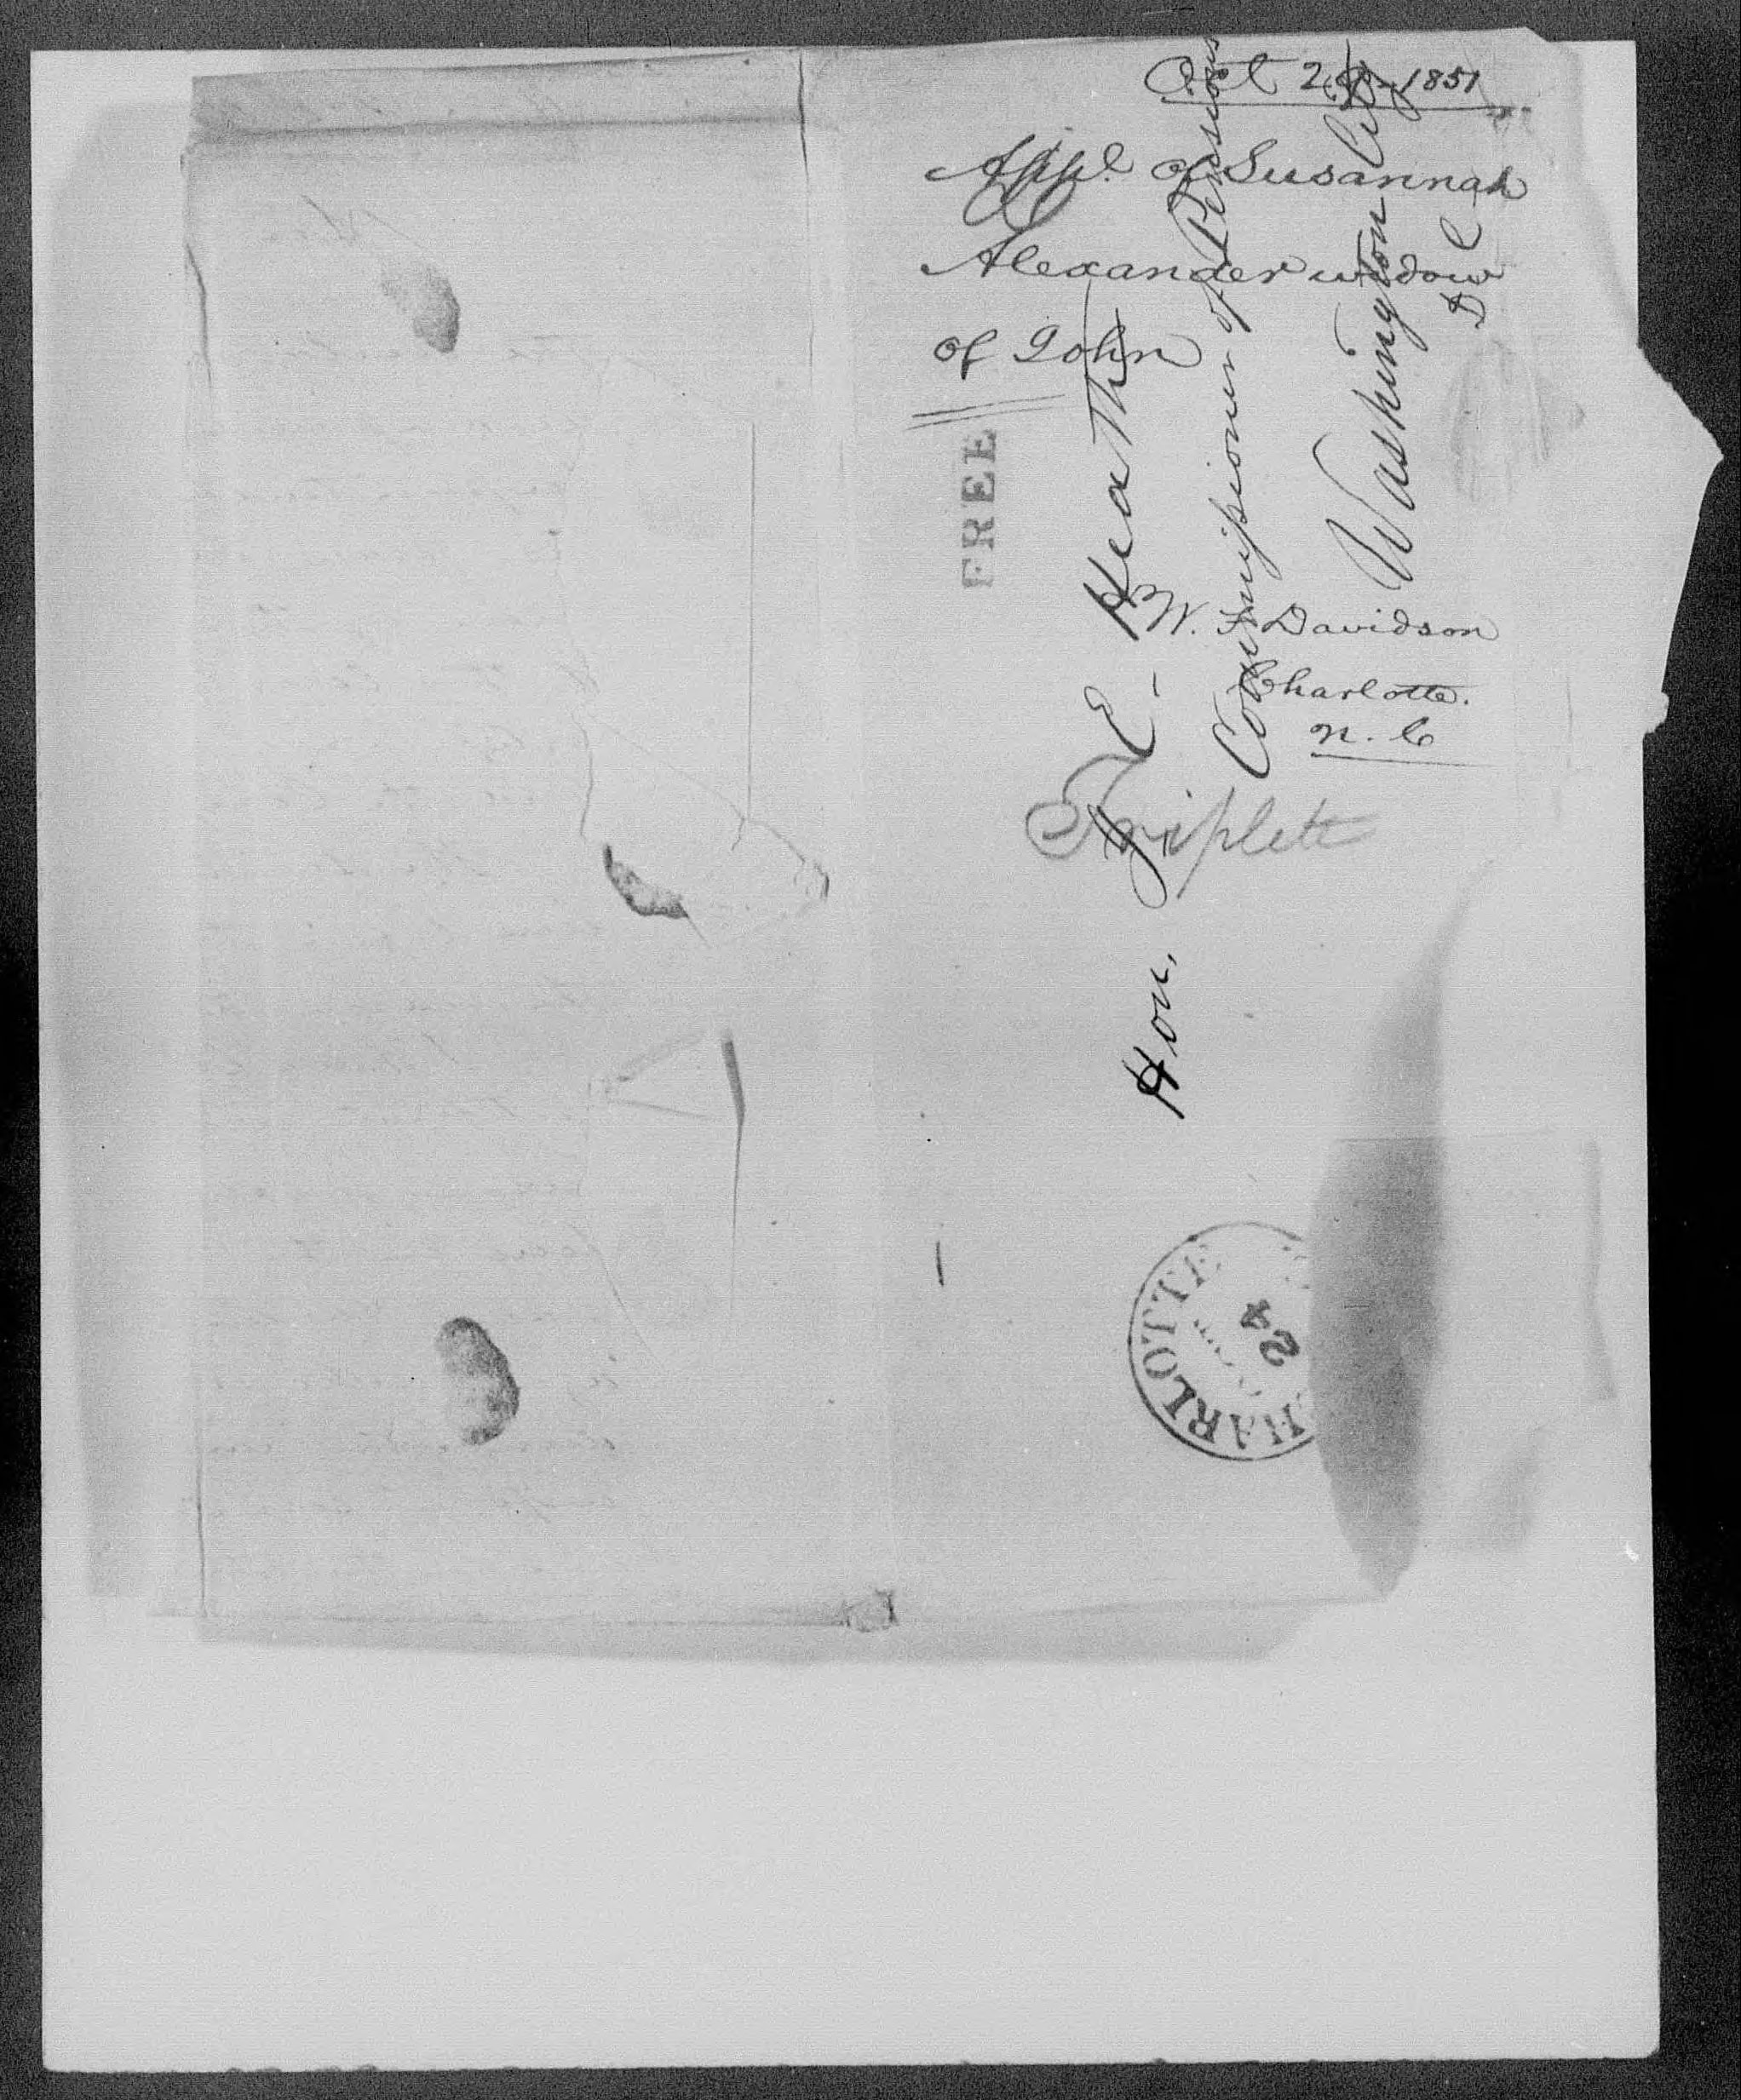 Letter from William Davidson to James Ewell Heath, 23 October 1851, page 2